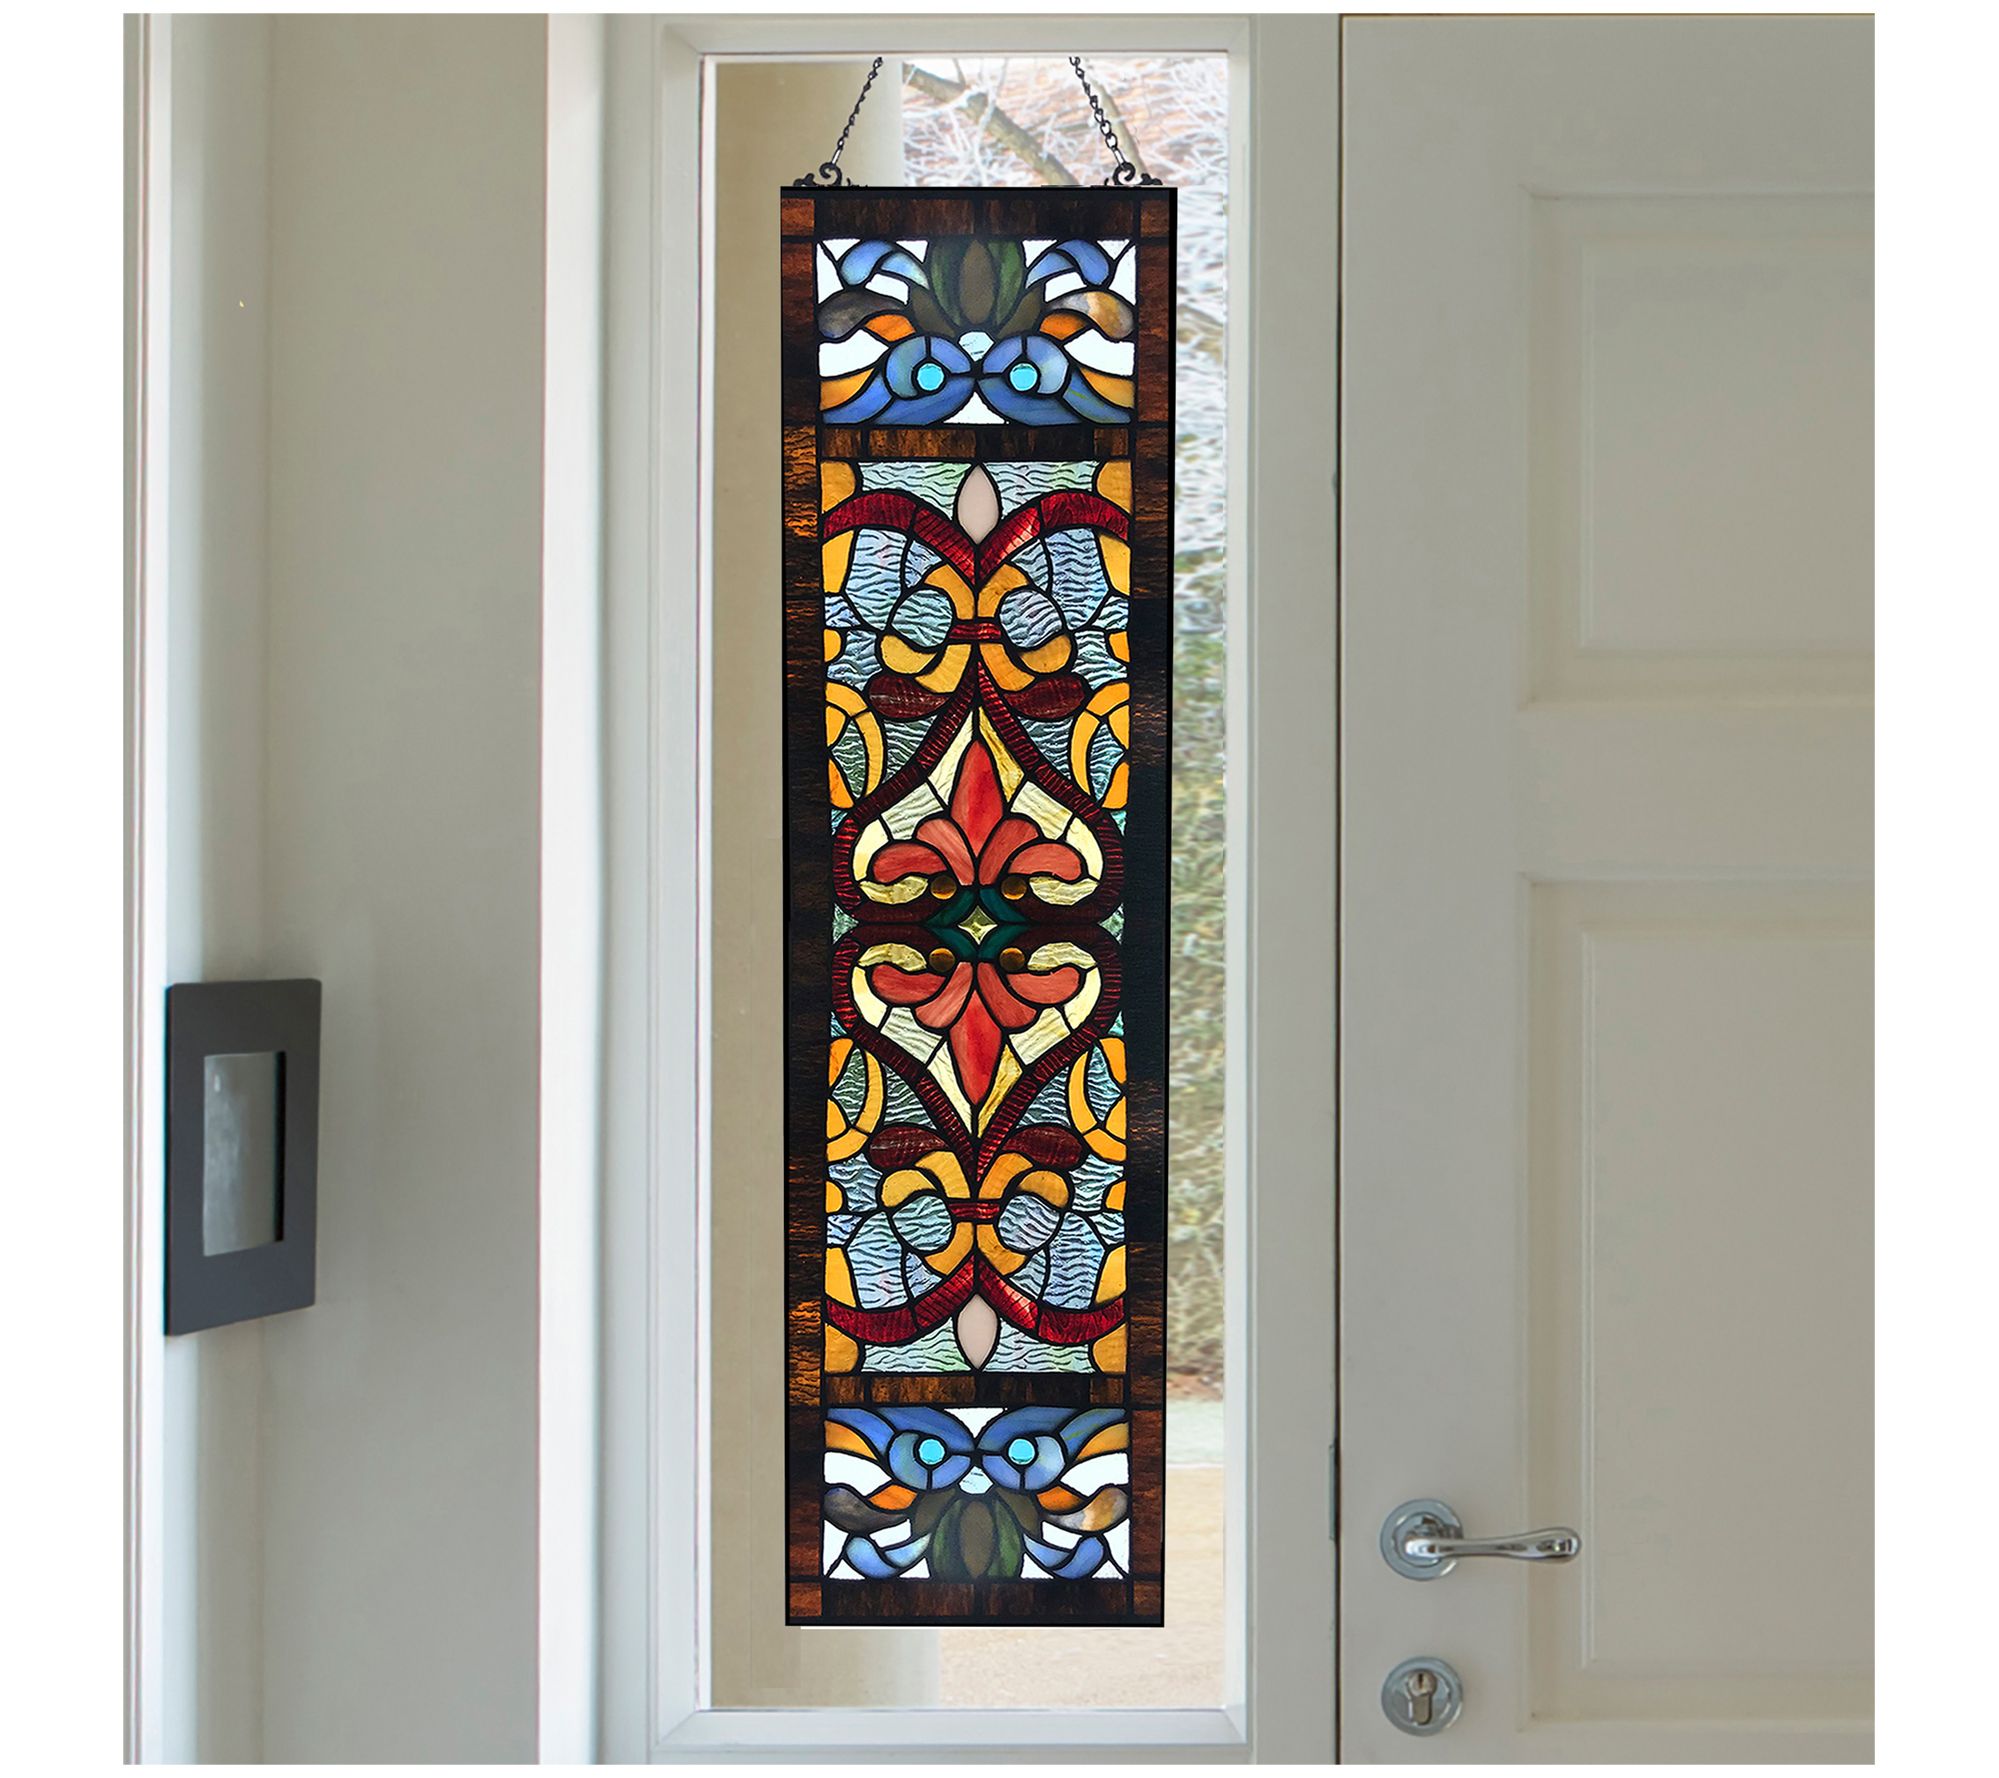 River of Goods 36H Stained Glass Fleur de Lis Window Panel